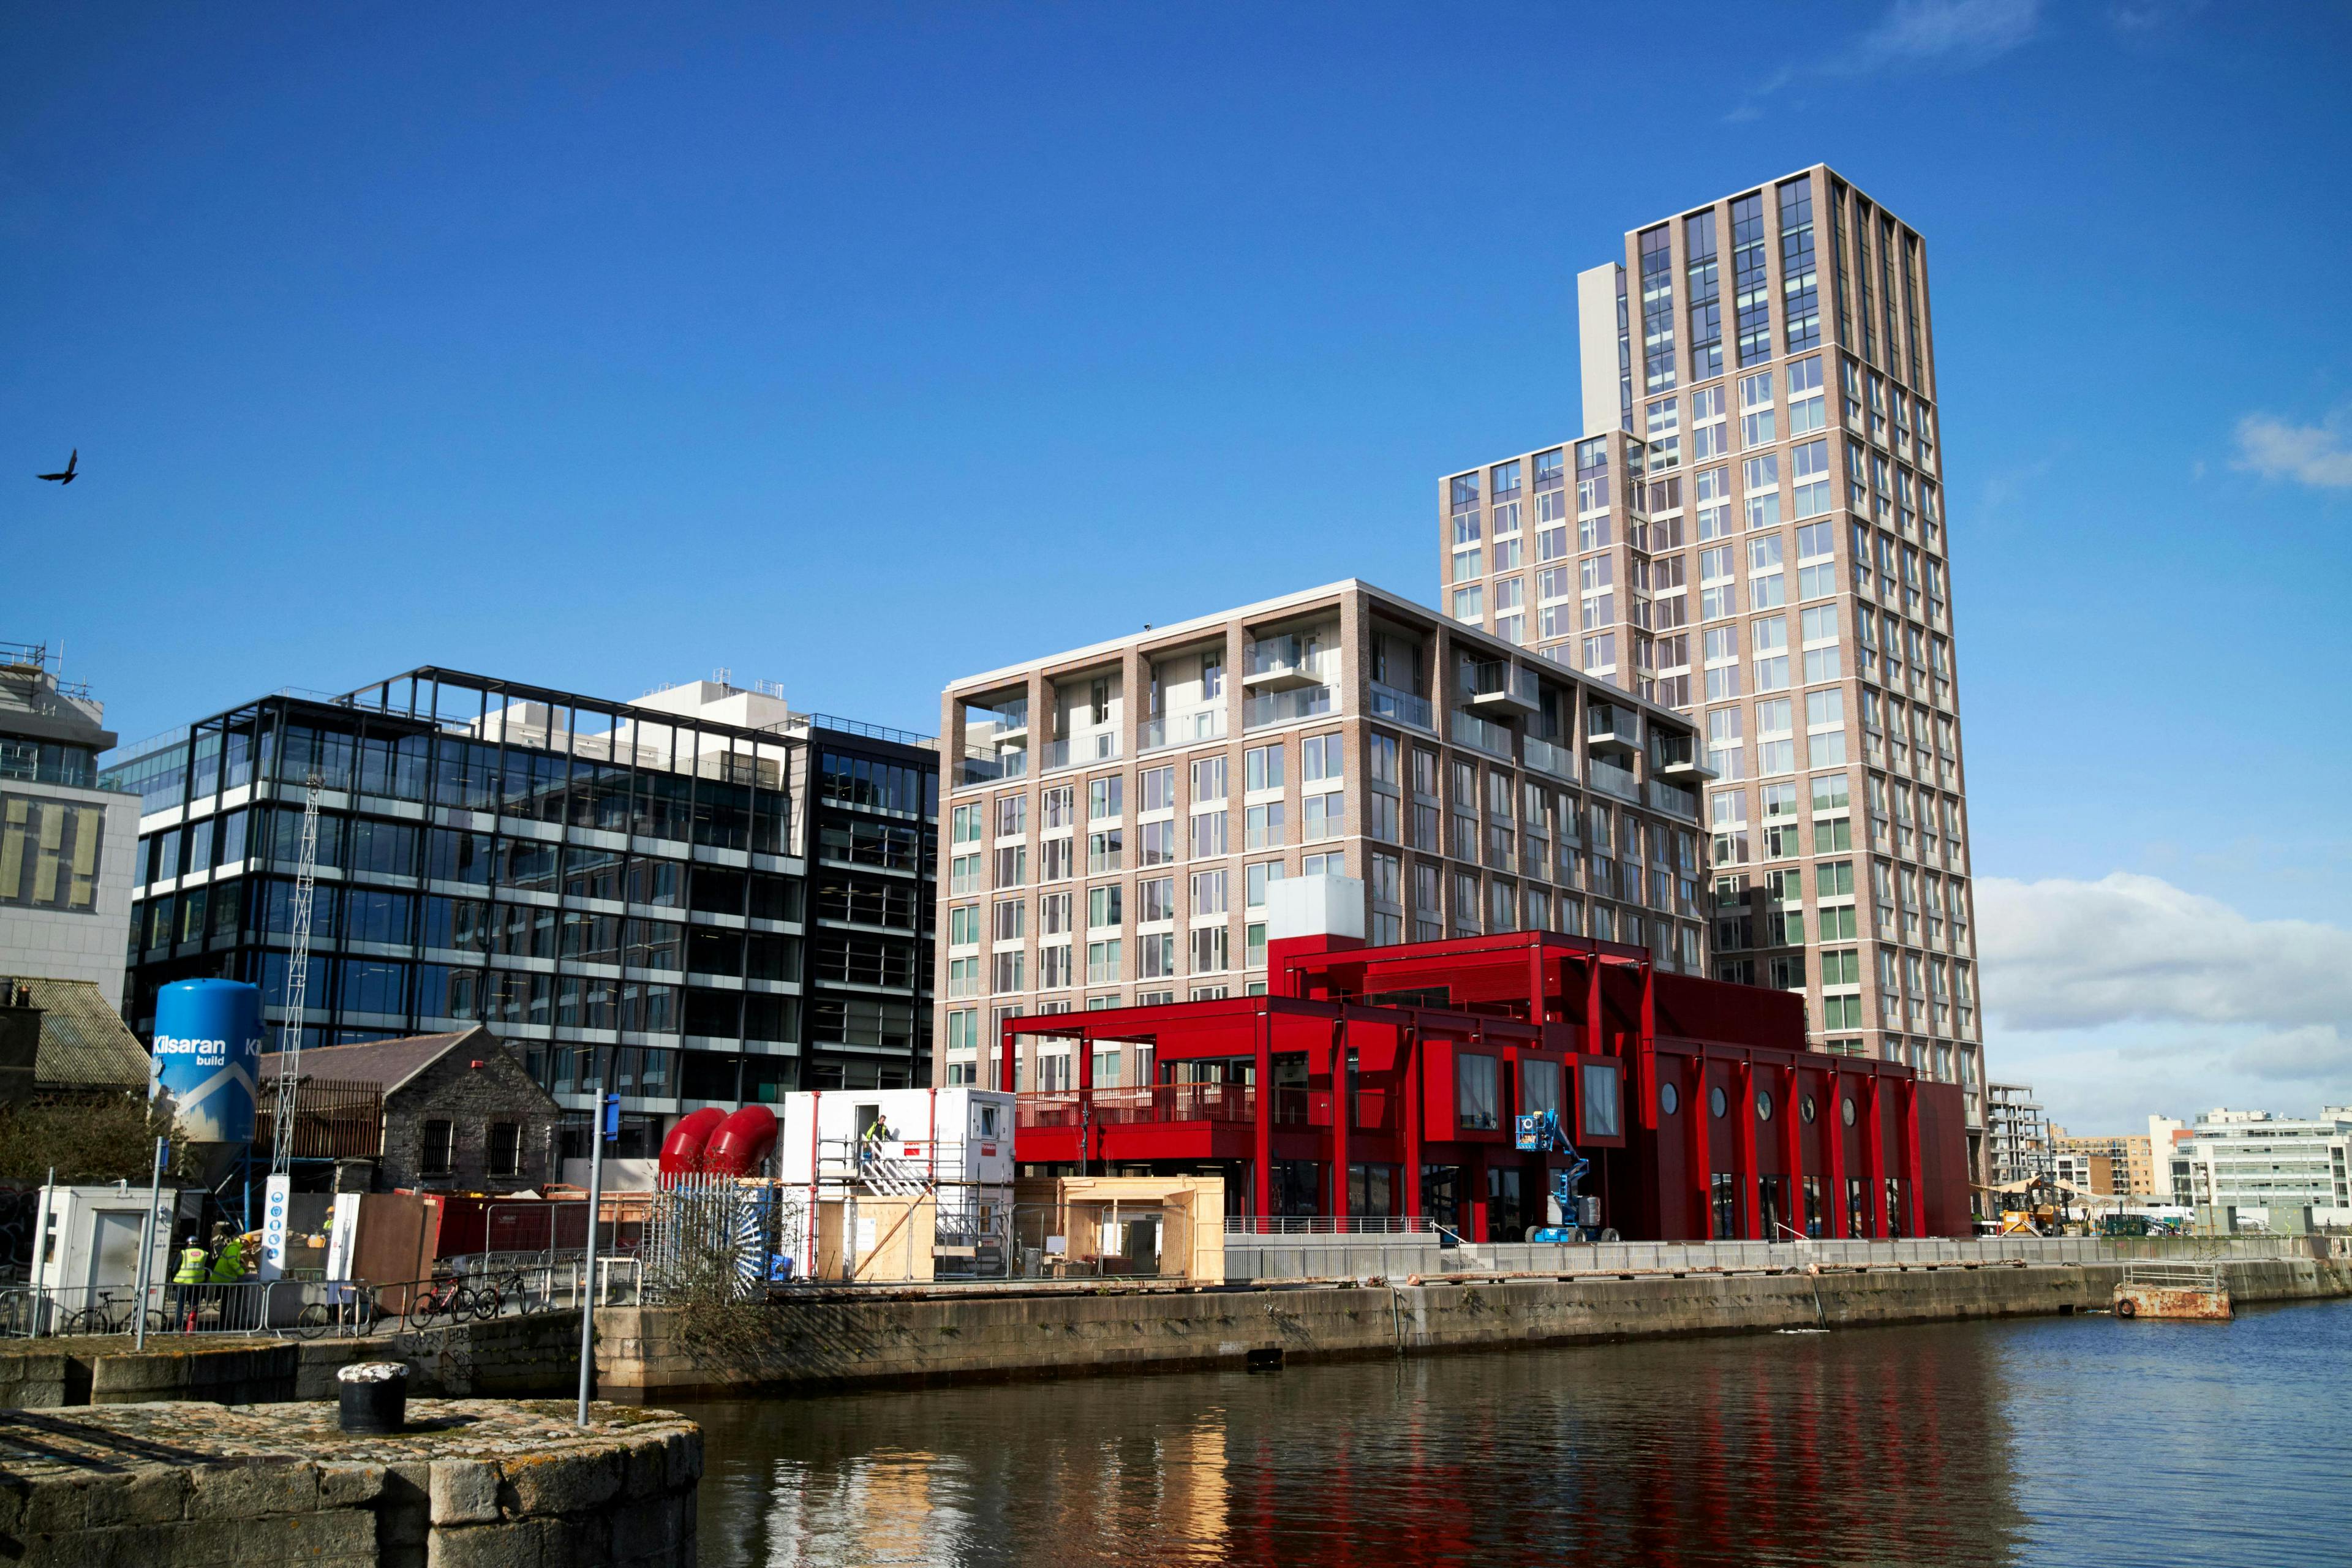 The Capital Dock development and surrounding buildings. The sun is shining.